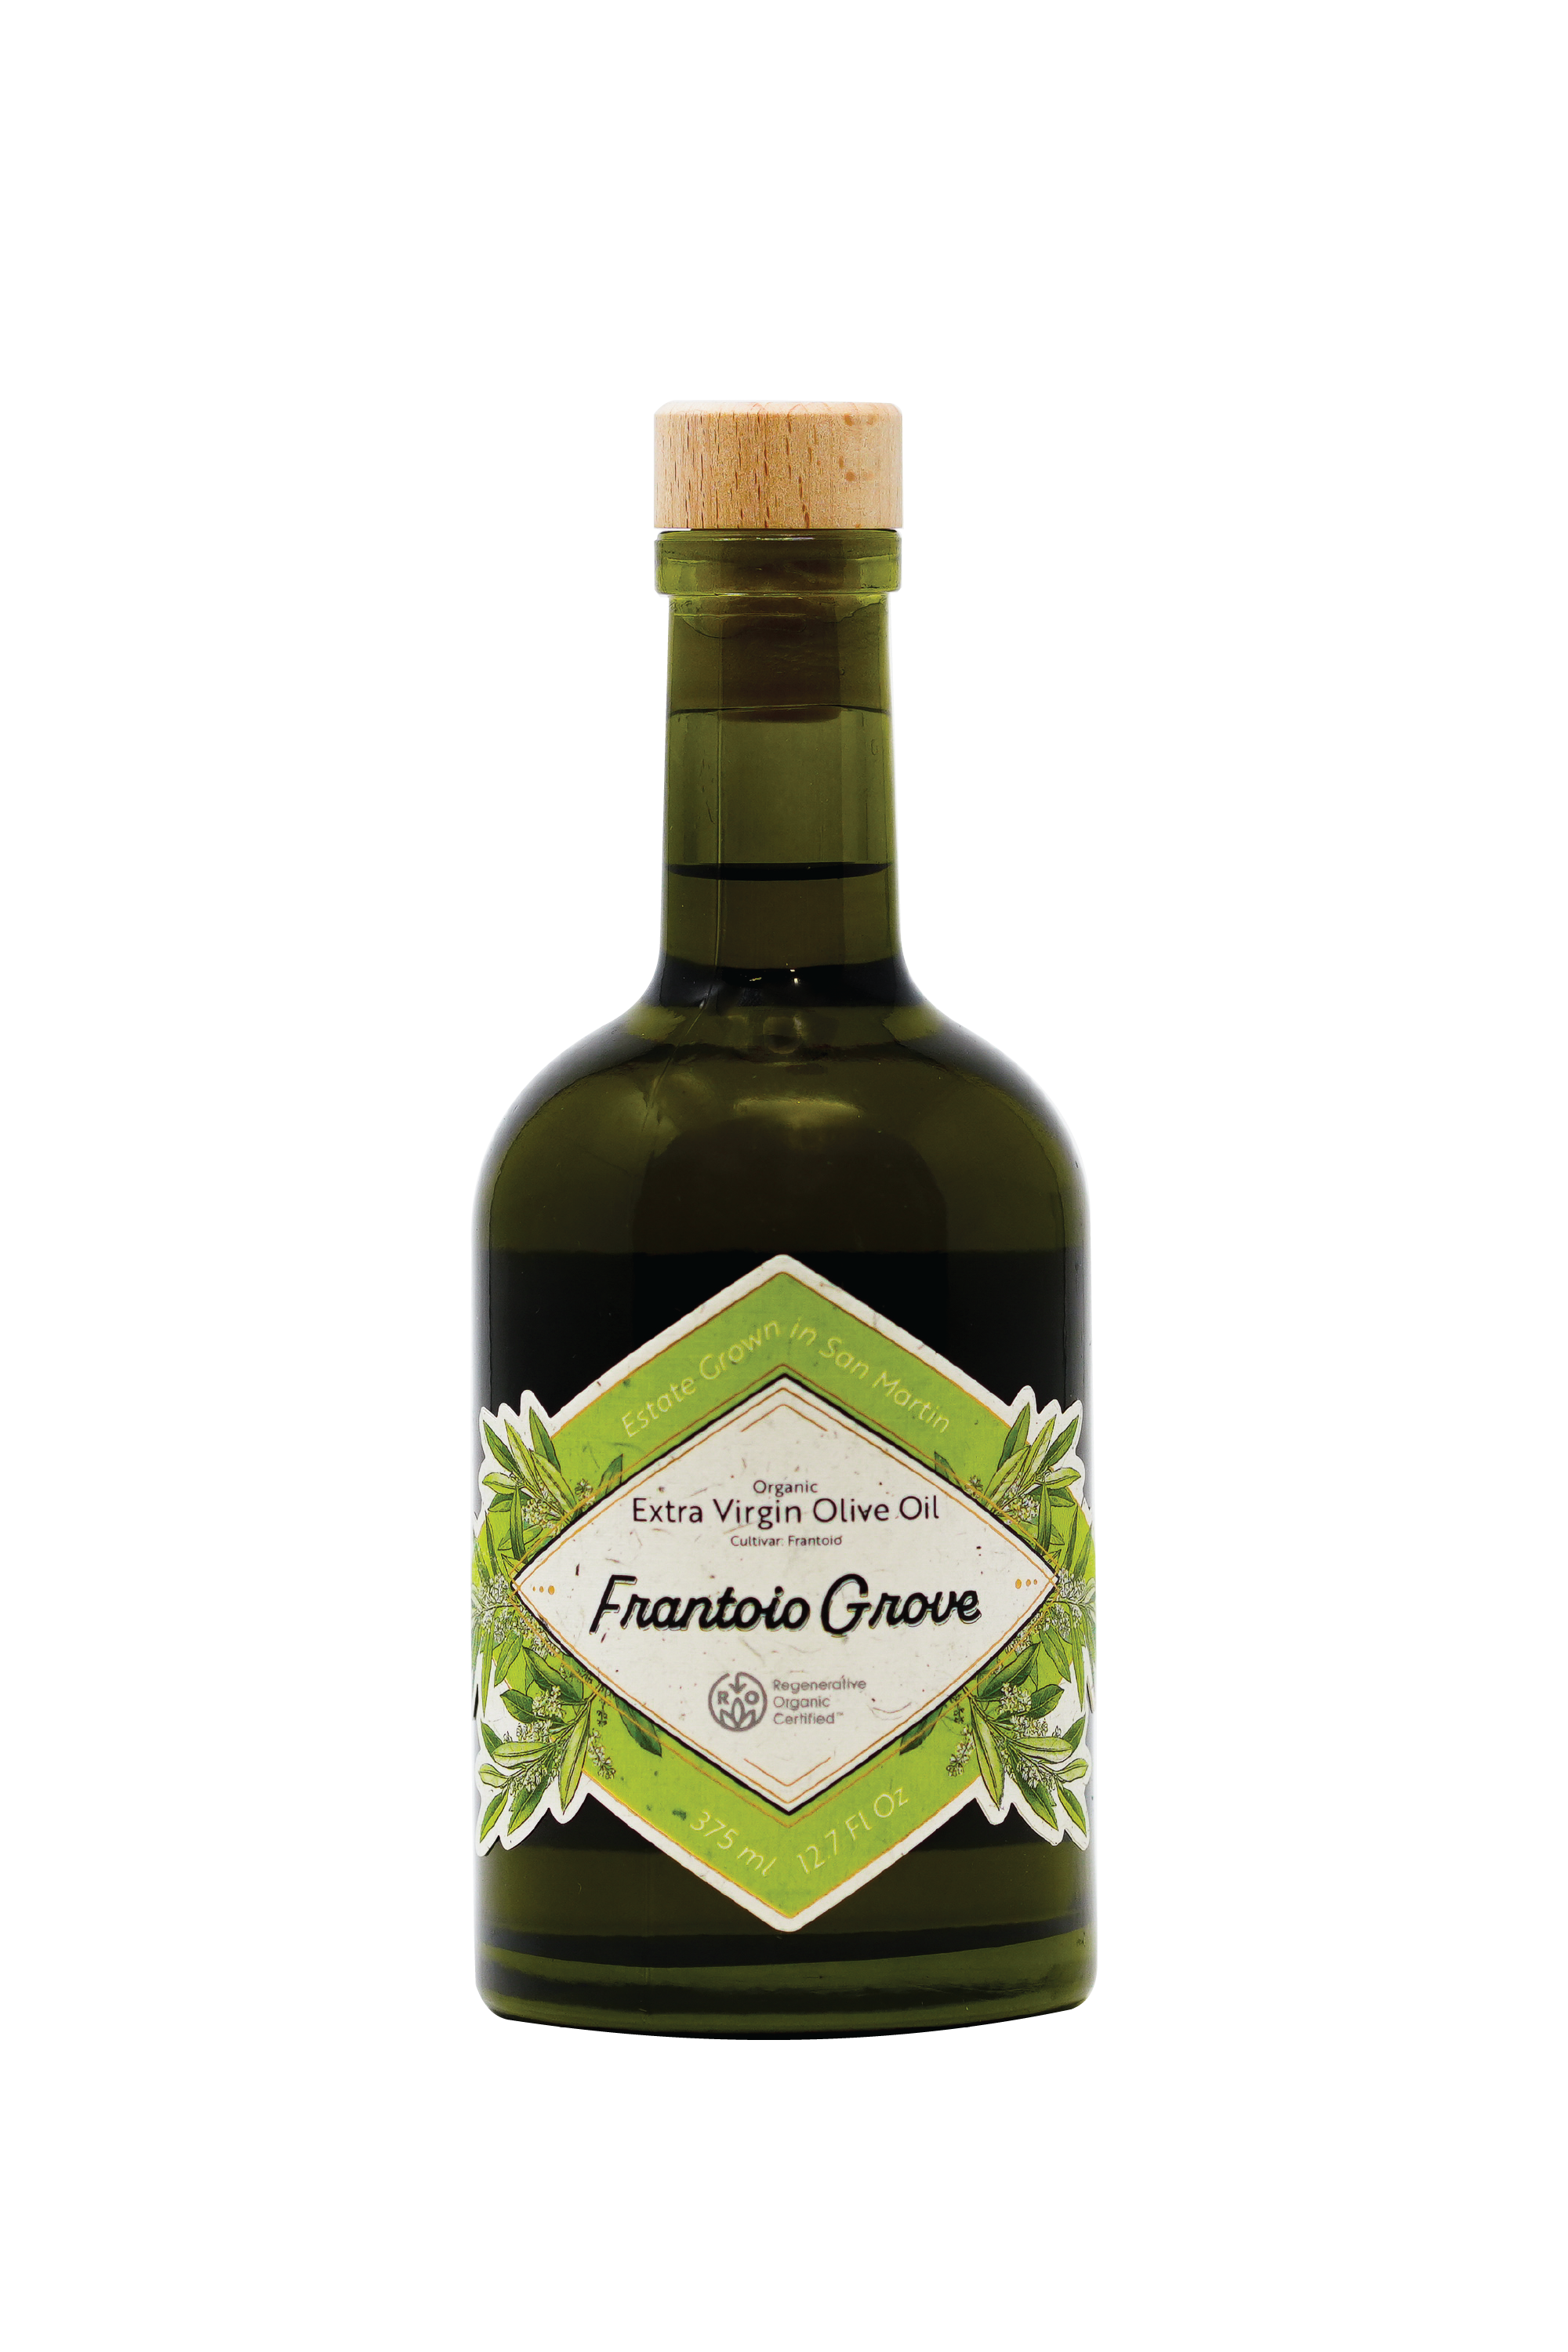 An Image OF Frantoio Grove's Flagship Frantoio Extra Virgin Olive Oil In a 375 ml Bottle With A White Background. Green and white diamond-shaped label with olive blossoms and leaves. Additional text on label reads: Estate grown in San Martin. Organic Extra Virgin Olive Oil. Cultivar: Frantoio. Regenerative Organic Certified.